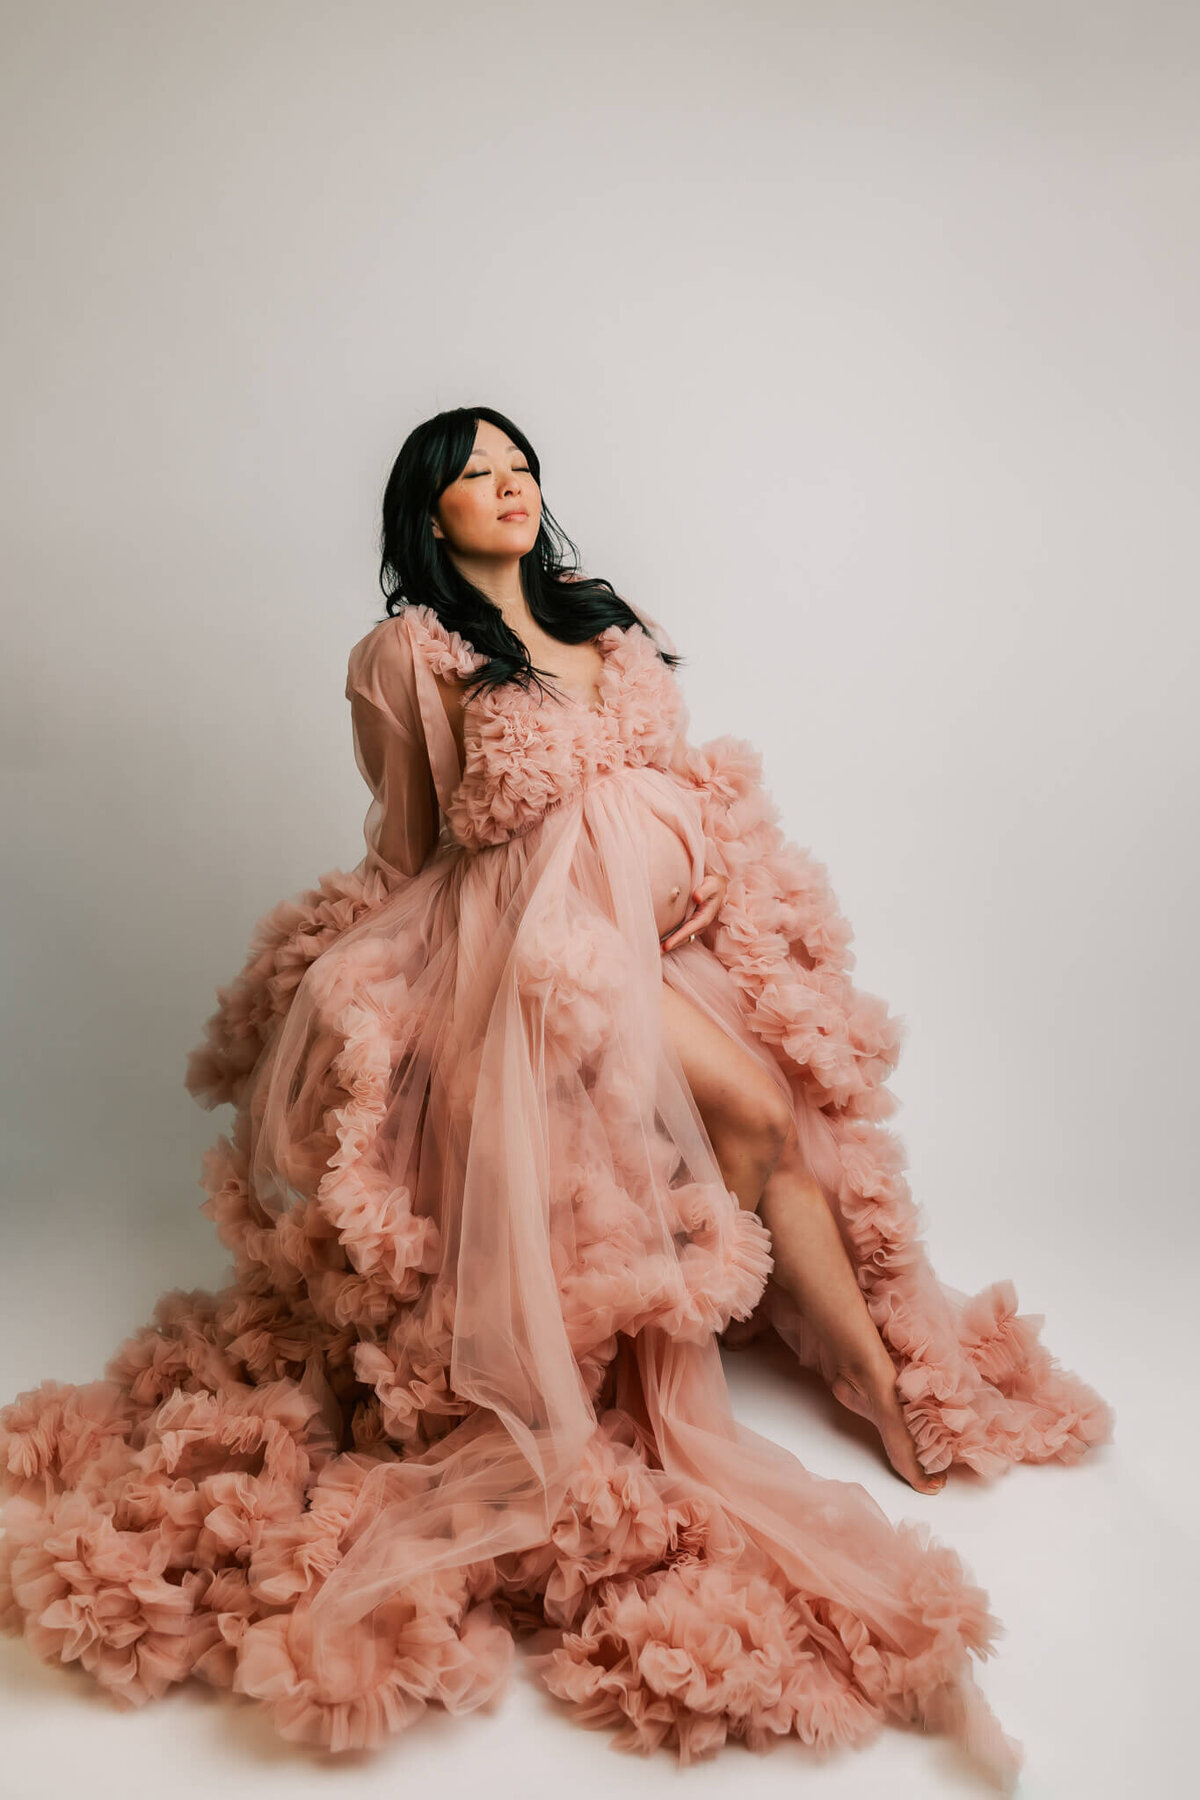 expecting mom posing in fine art studio maternity session in portland oregon wearing a pink tulle gown sitting on a stool with her leg pointed